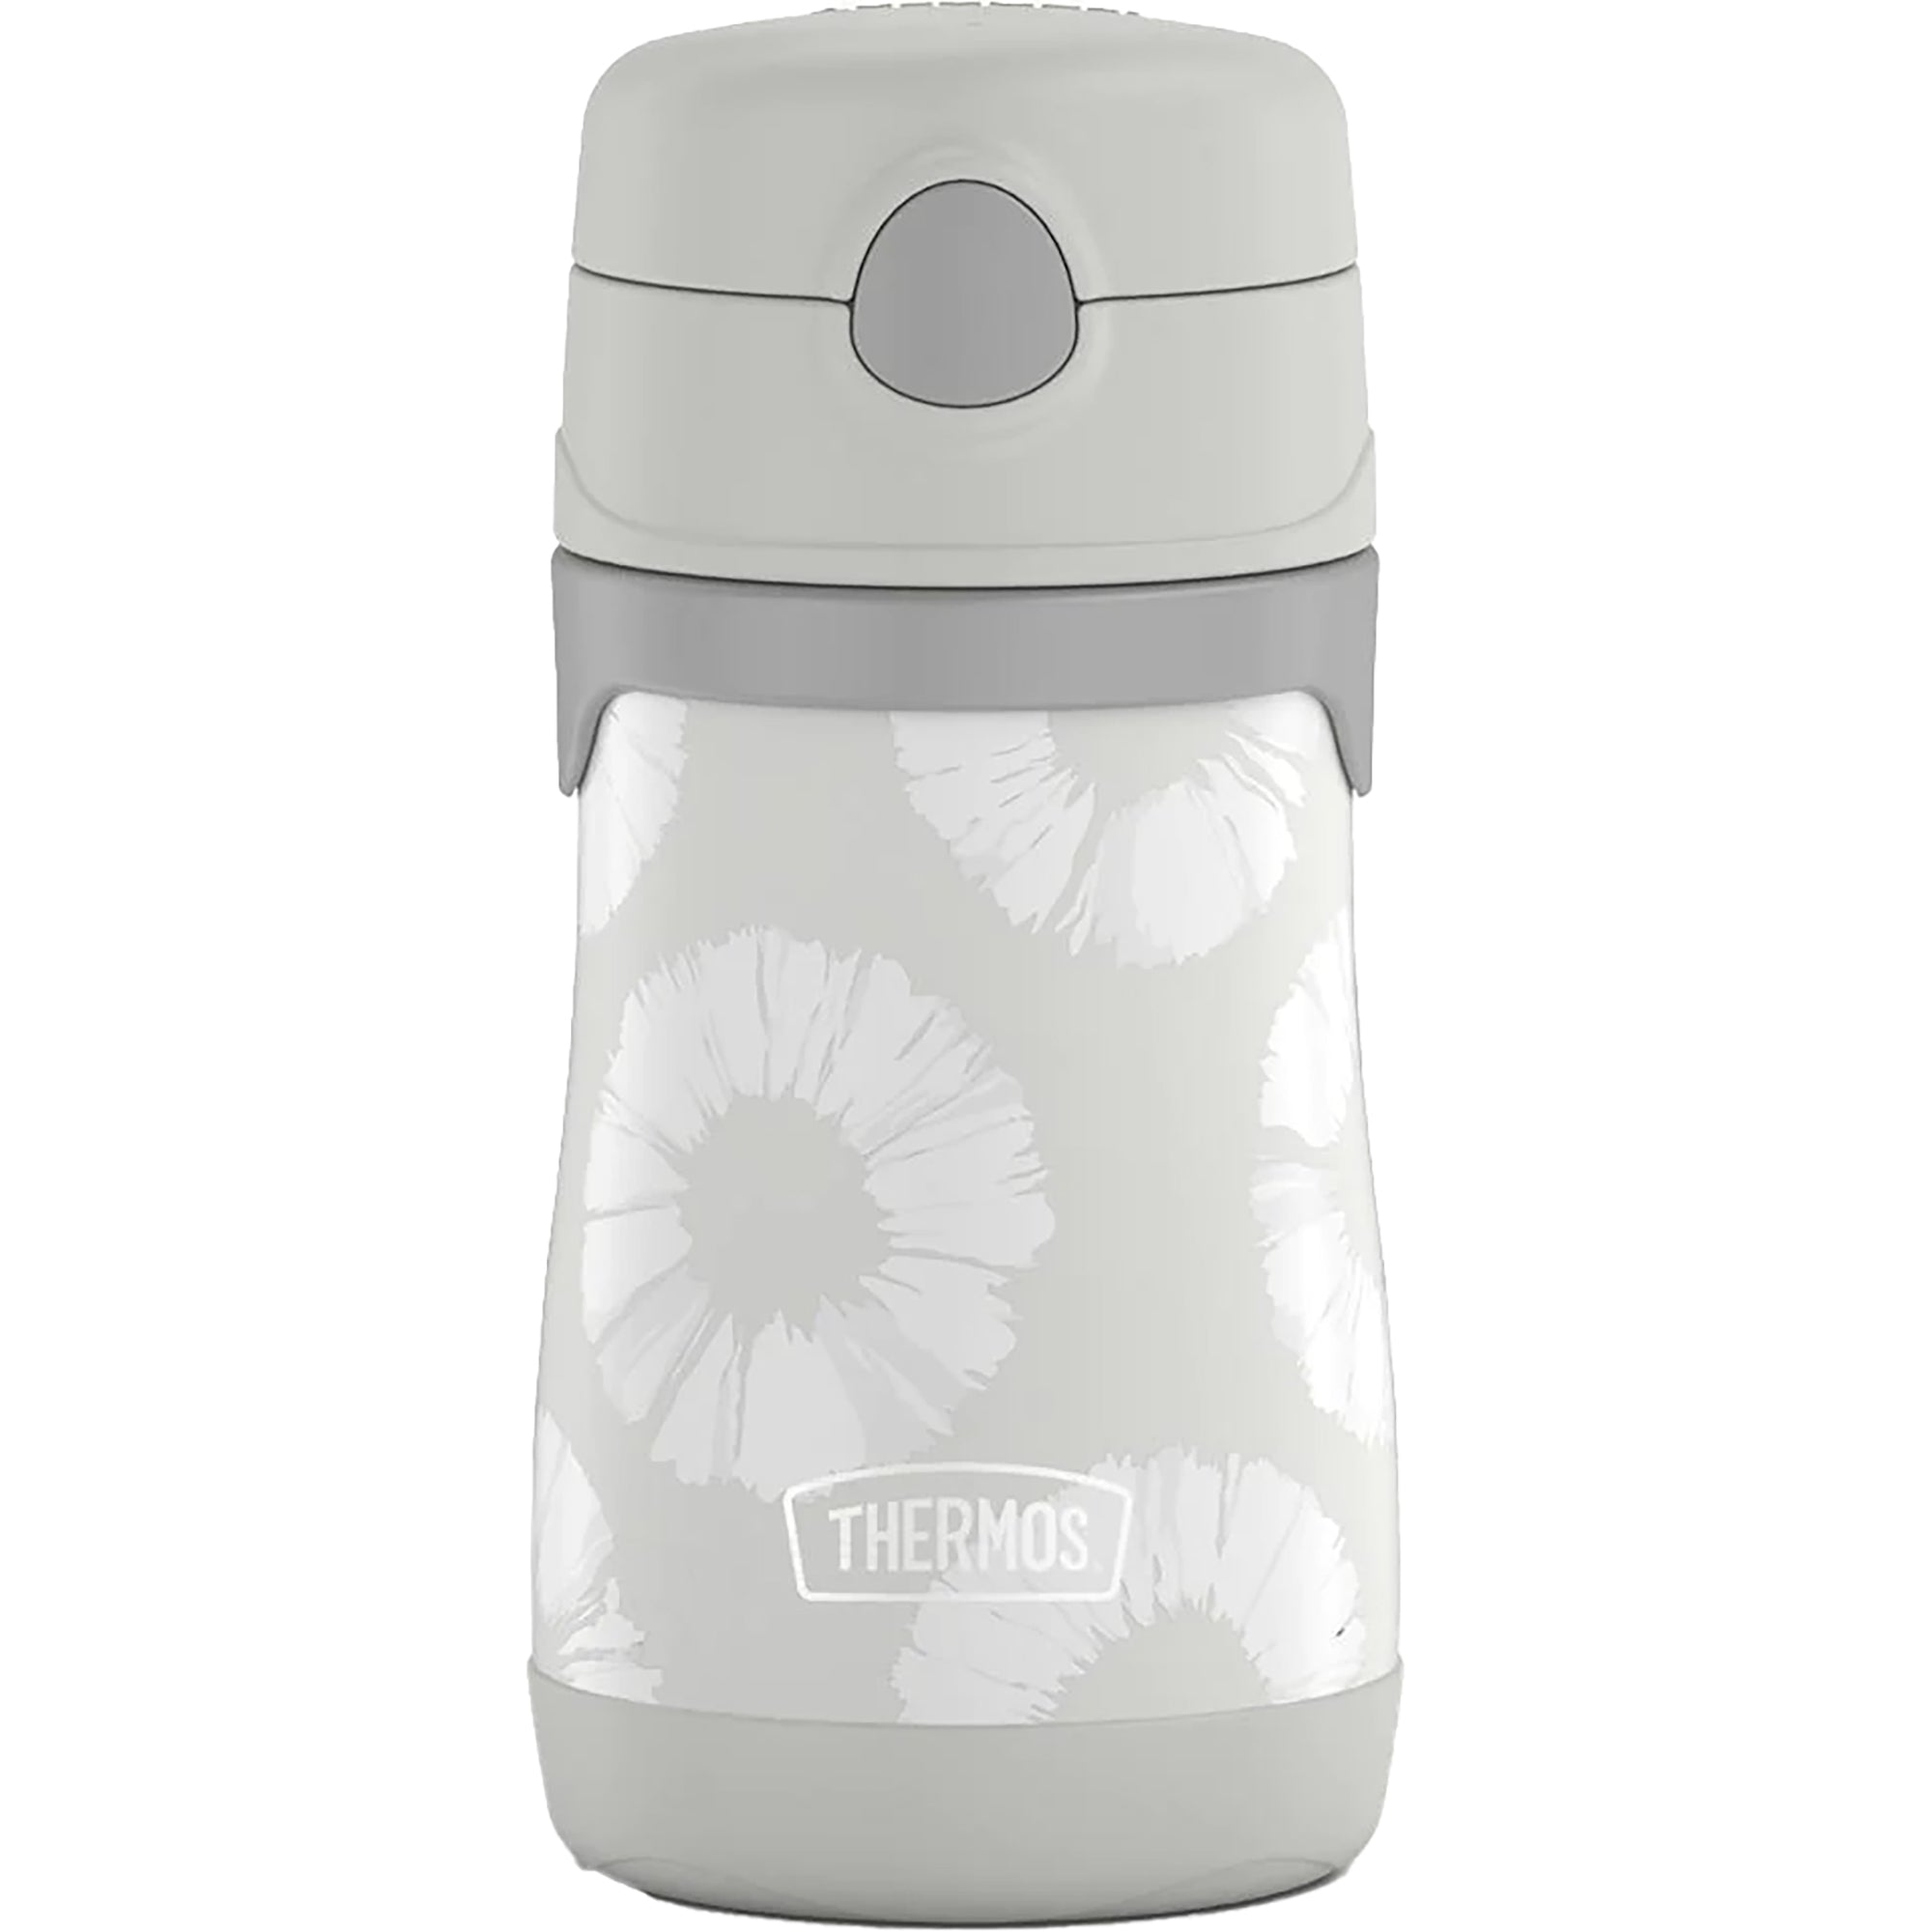 Thermos 10 oz. Kid's Funtainer Vacuum Insulated Stainless Steel Food Jar Mandalorian